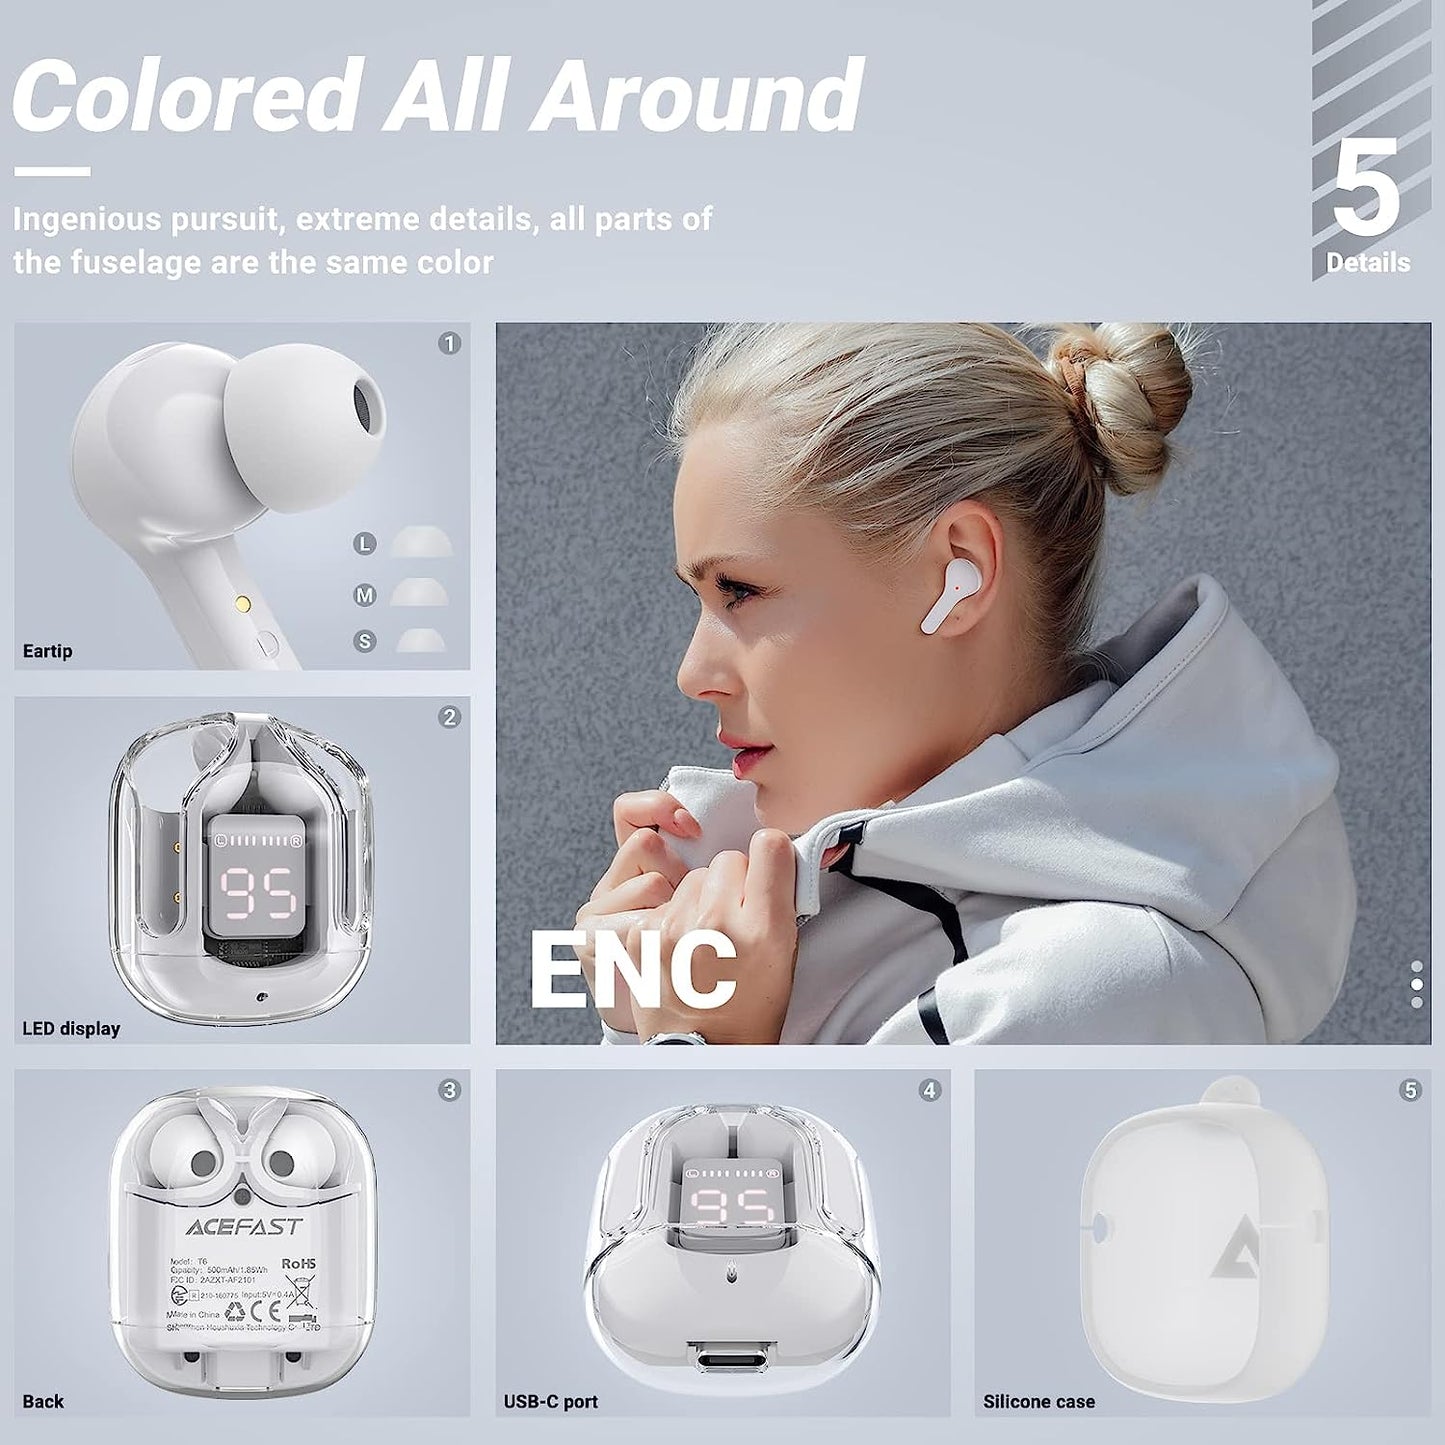 Molbin M1 Ultra Wireless Earbuds with ENC Noise Canceling Translucent Earphones